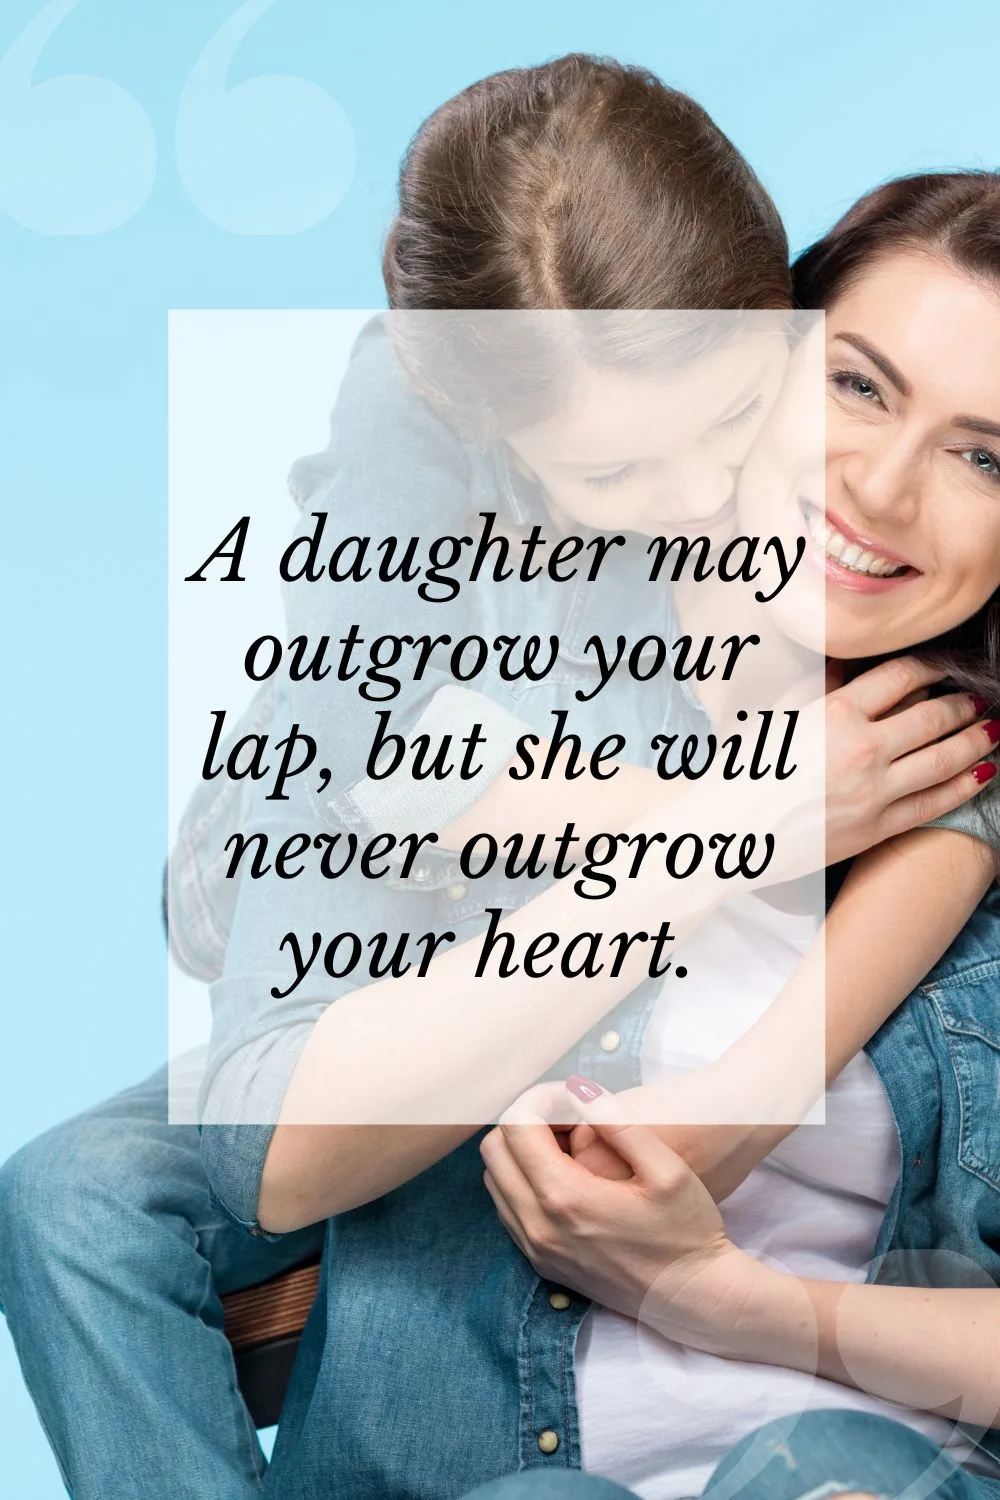 Mother daughter inspiring quote 